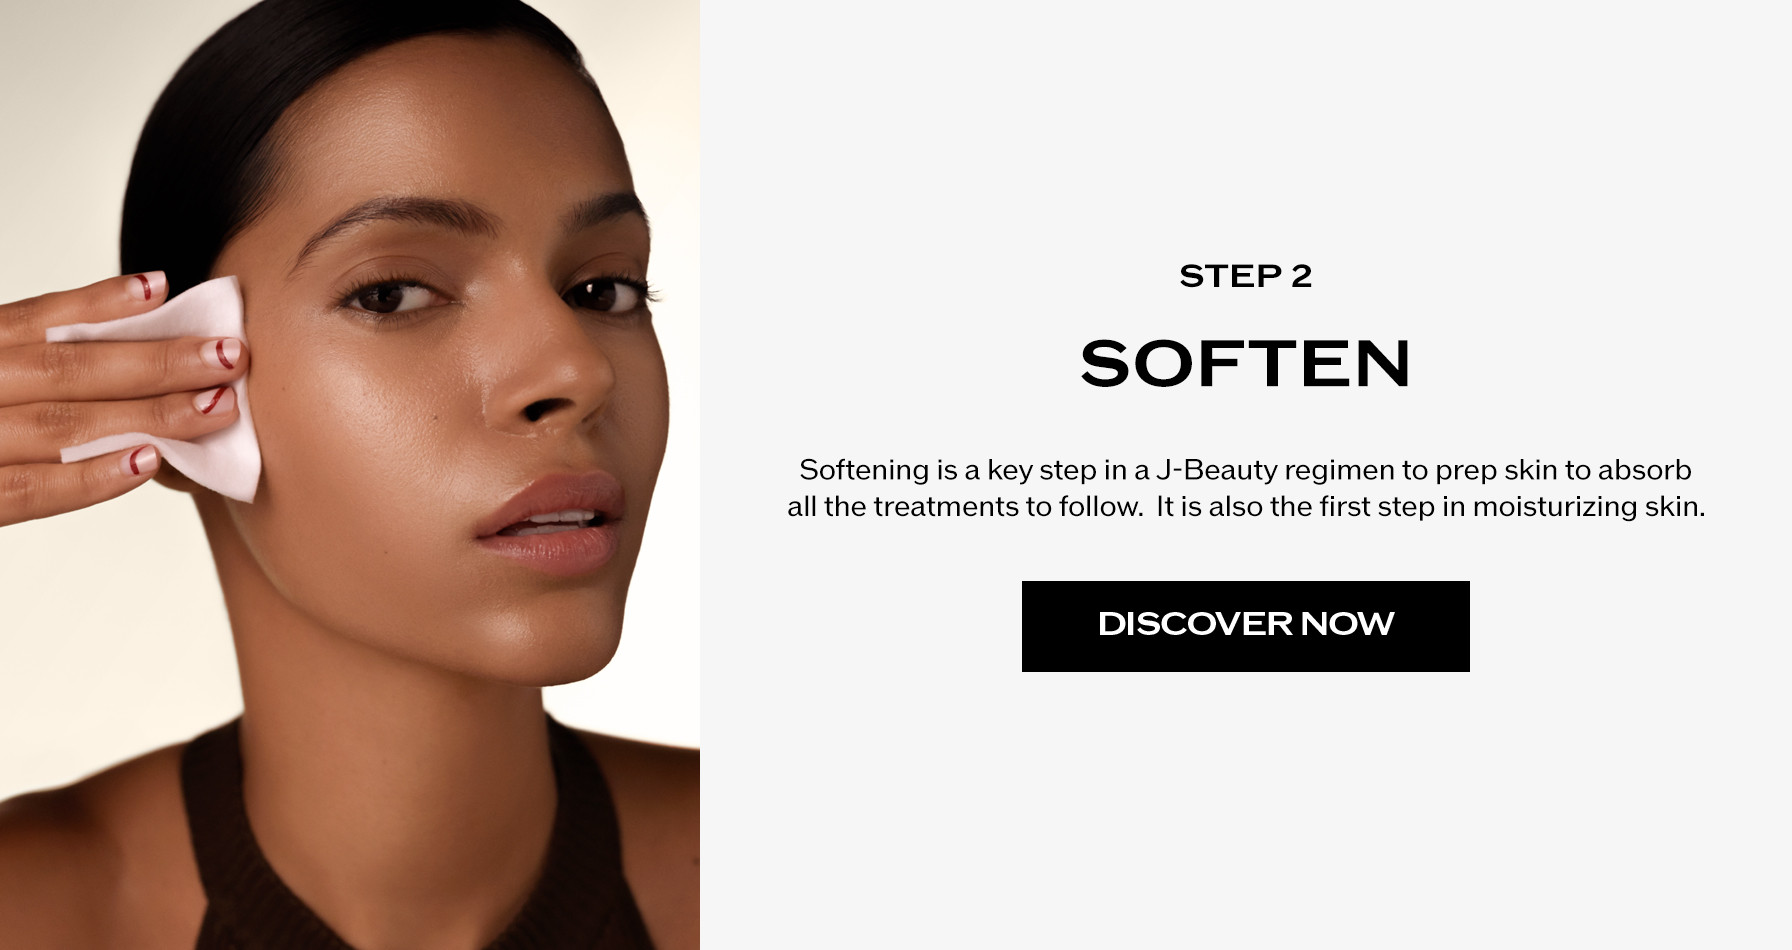 Step 2: Soften. Softening is a key step in a J-Beauty regimen to prep skin to absorb all the treatments to follow.  It is also the first step in moisturizing skin.